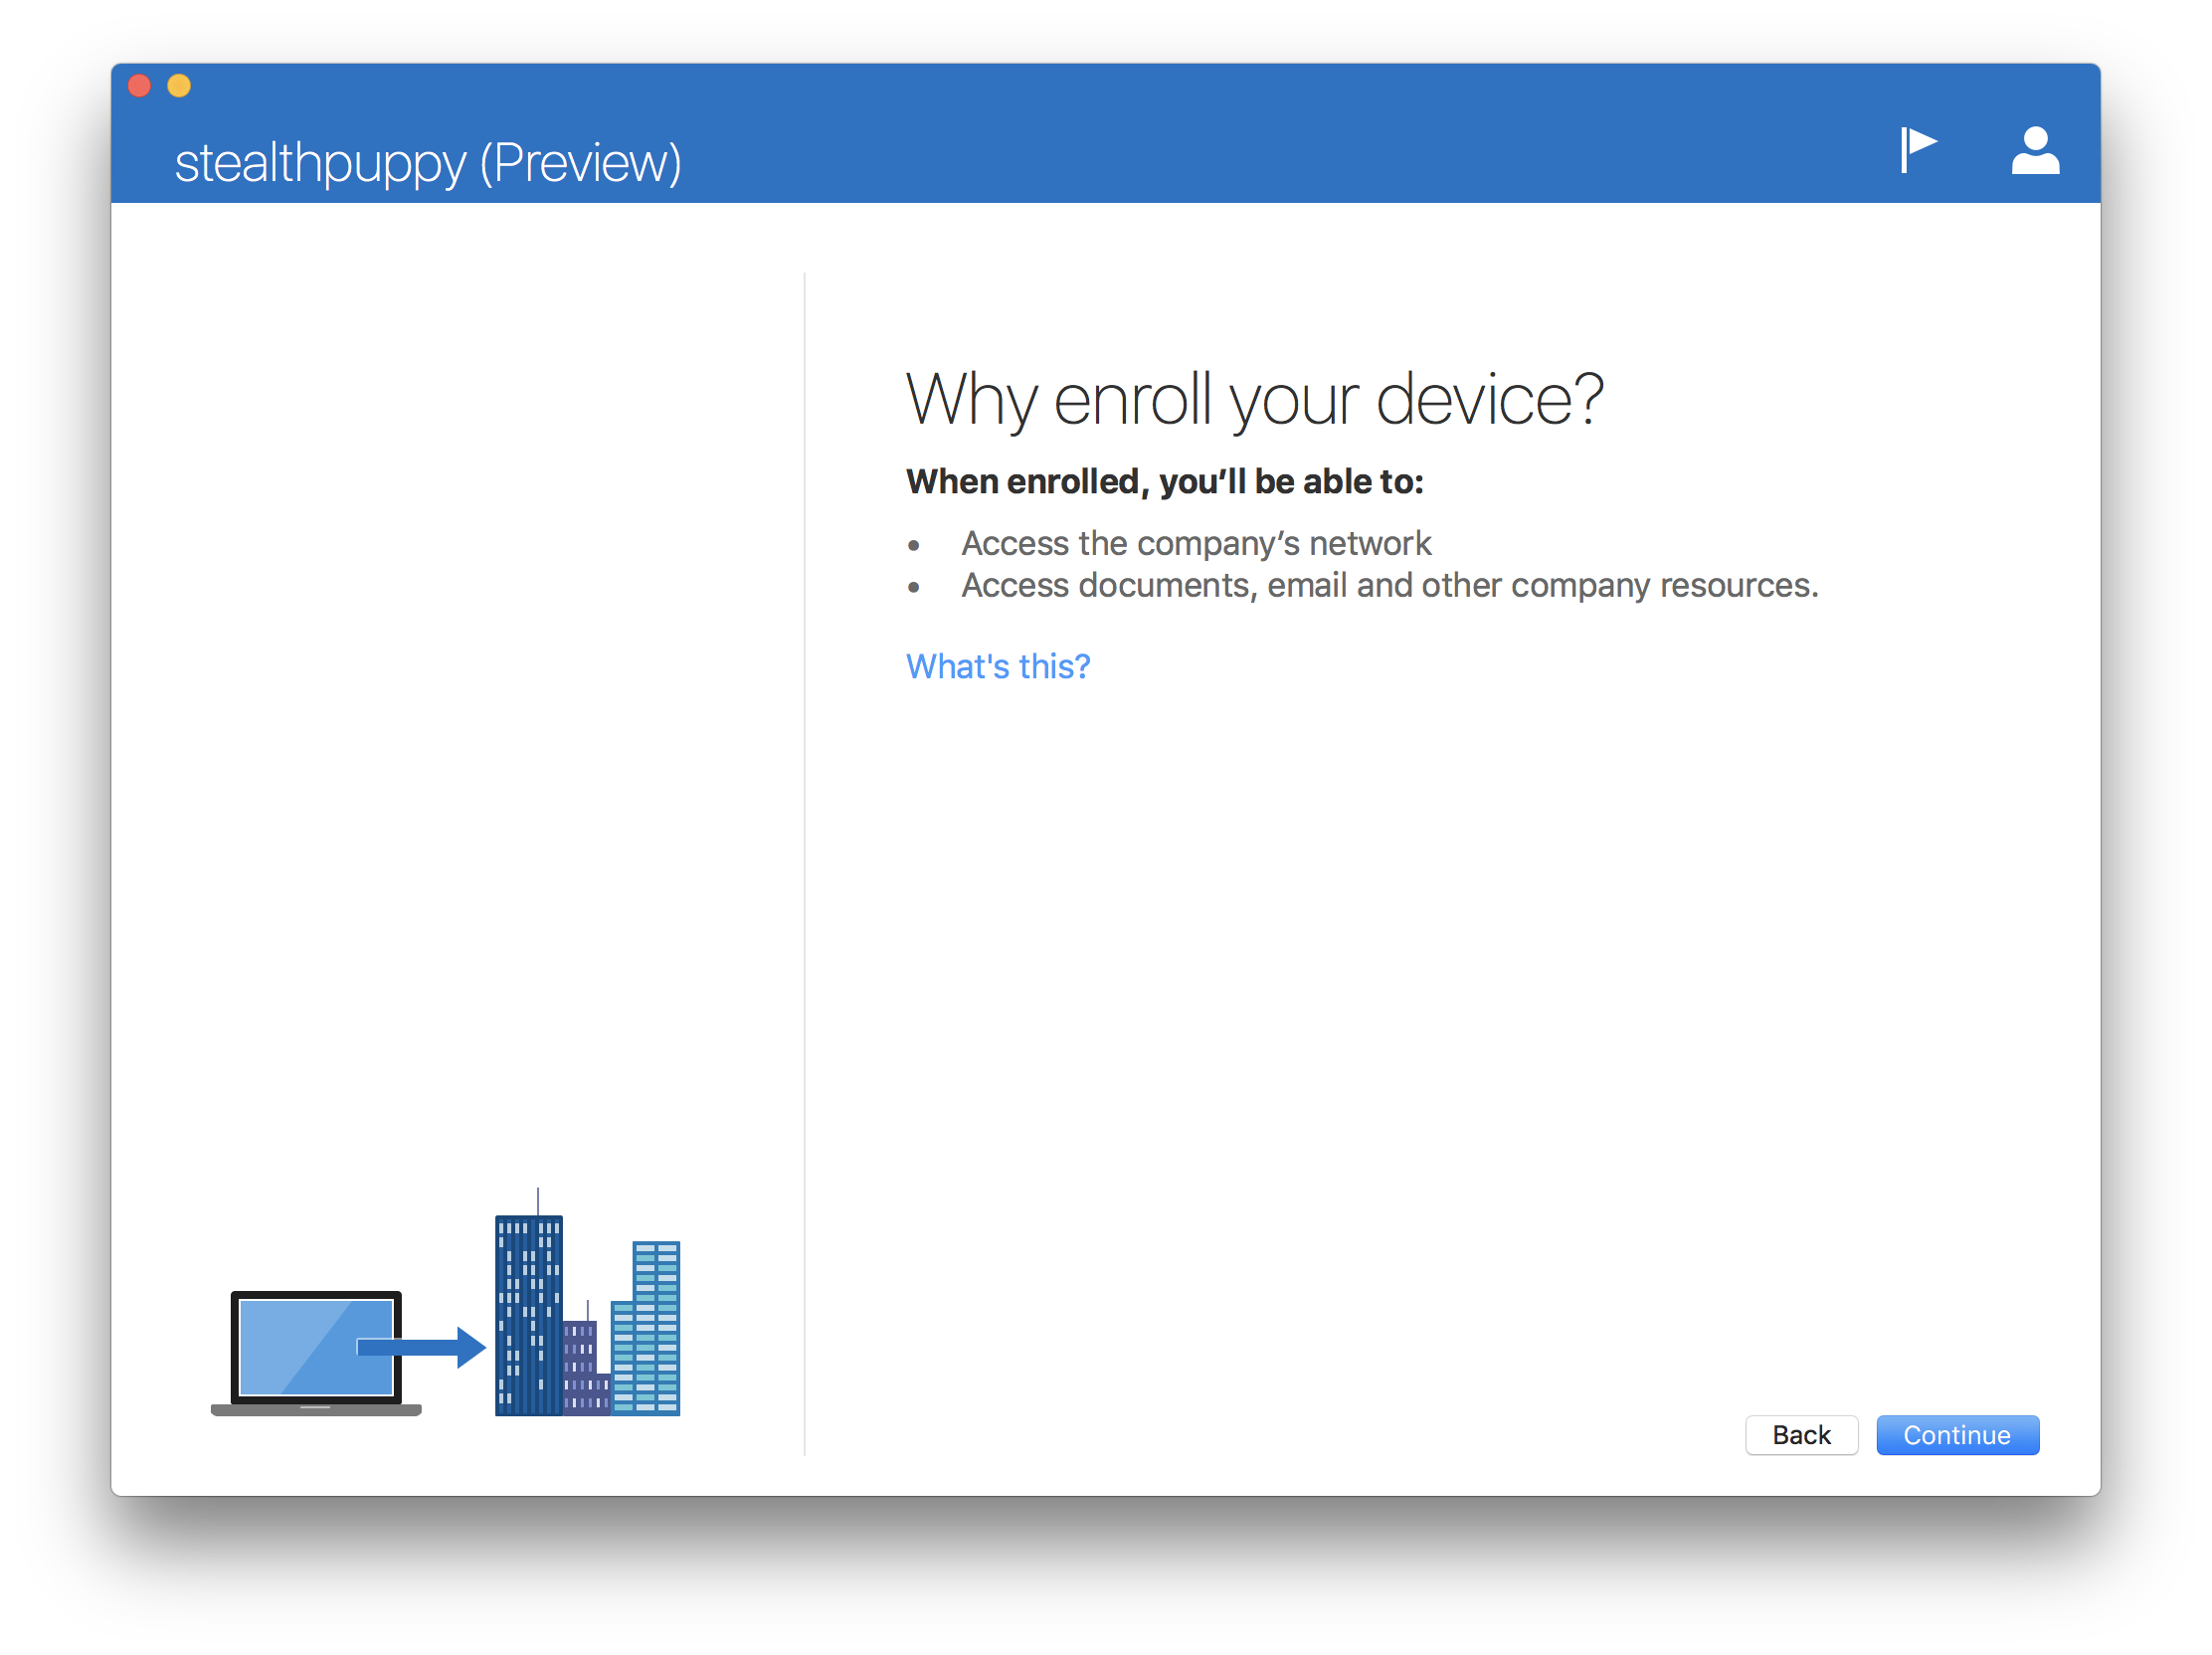 Why enroll your device?